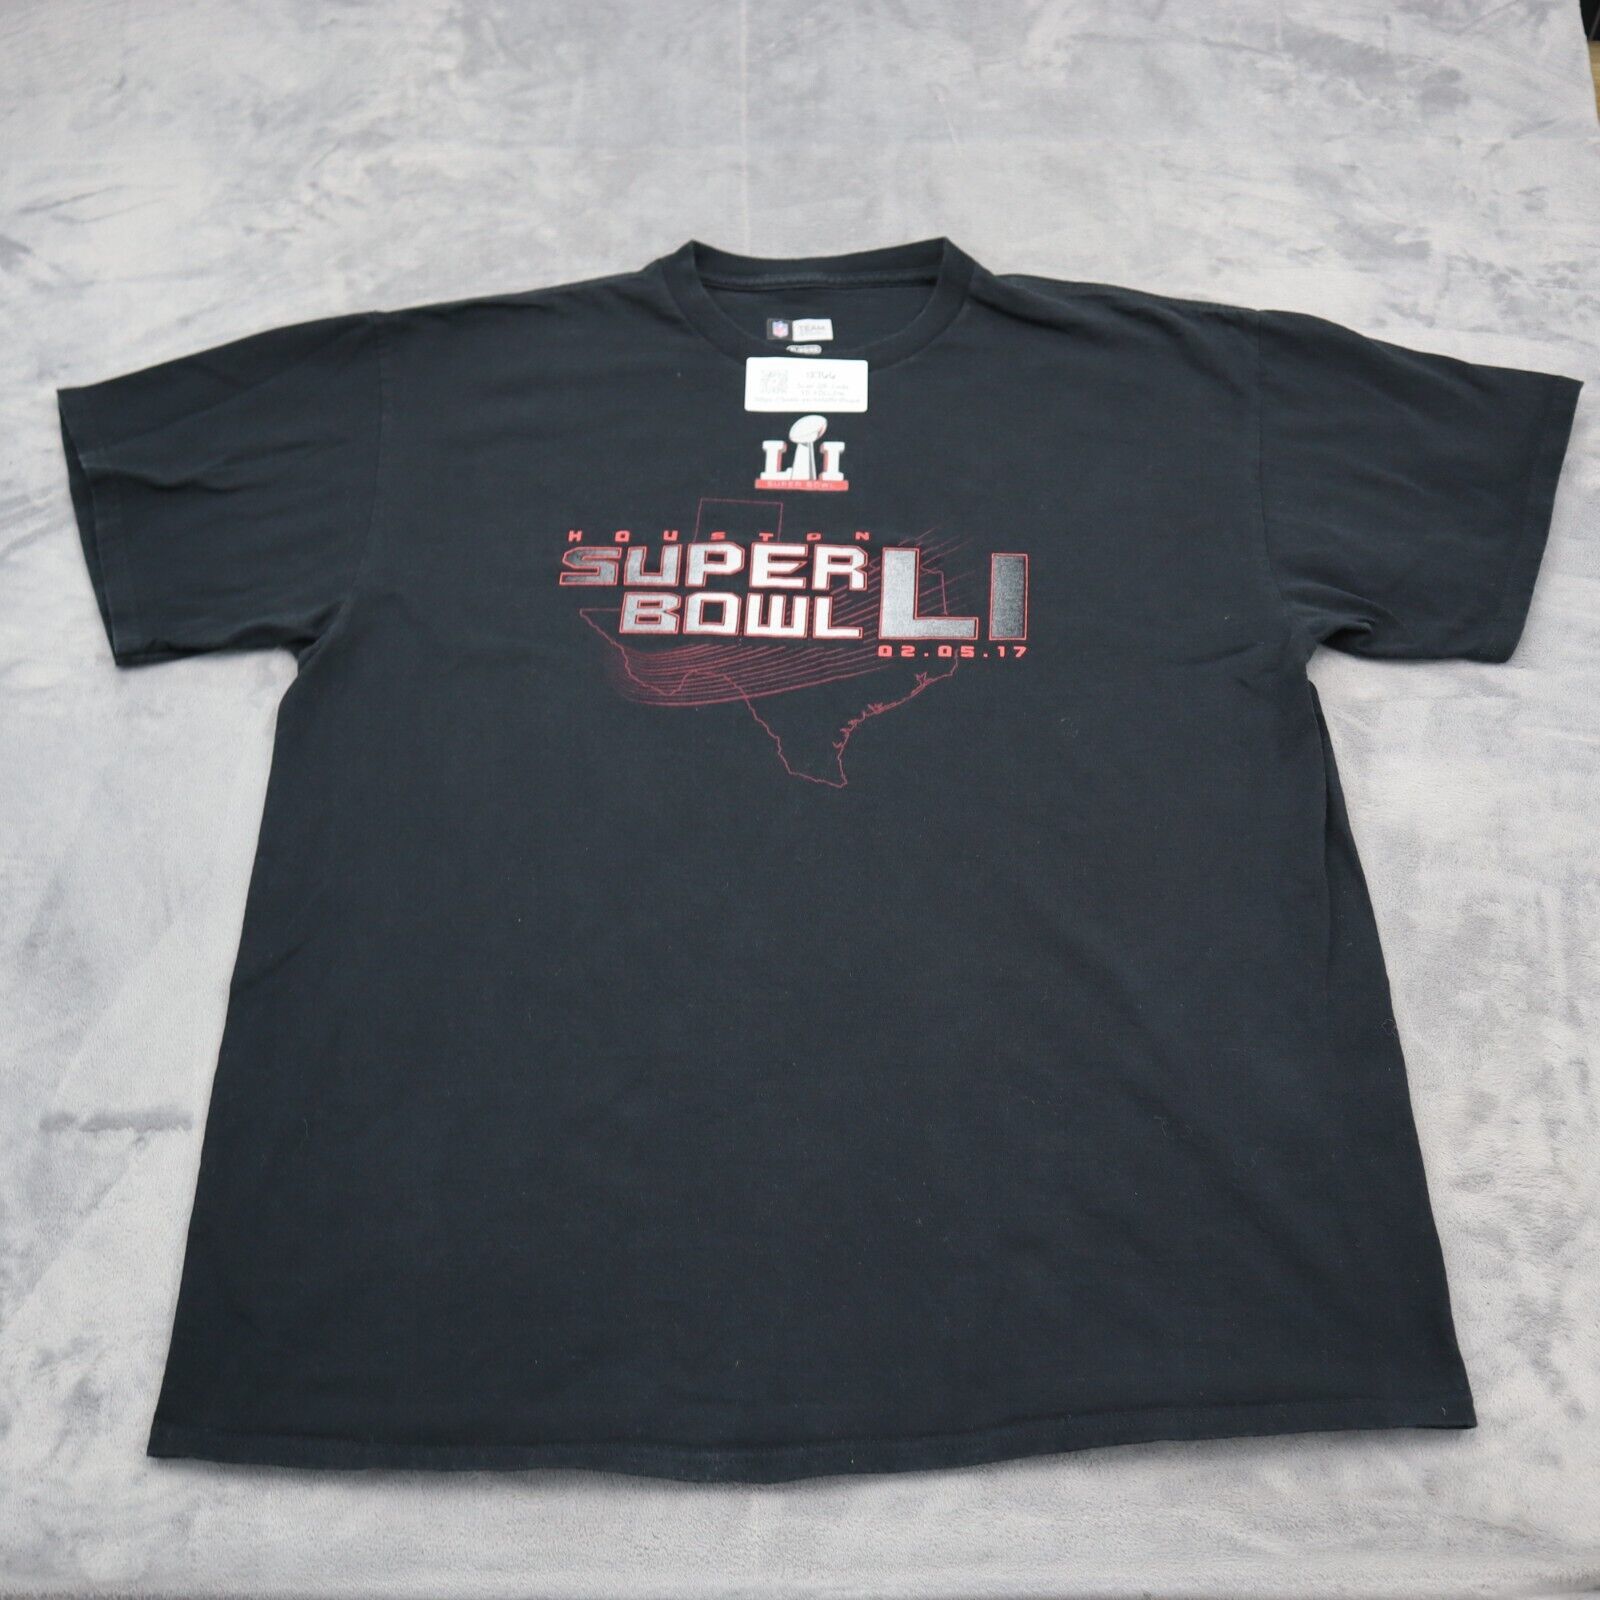 Primary image for NFL Shirt Mens XL Black Houston Super Bowl Team Apparel Basic Casual Tee